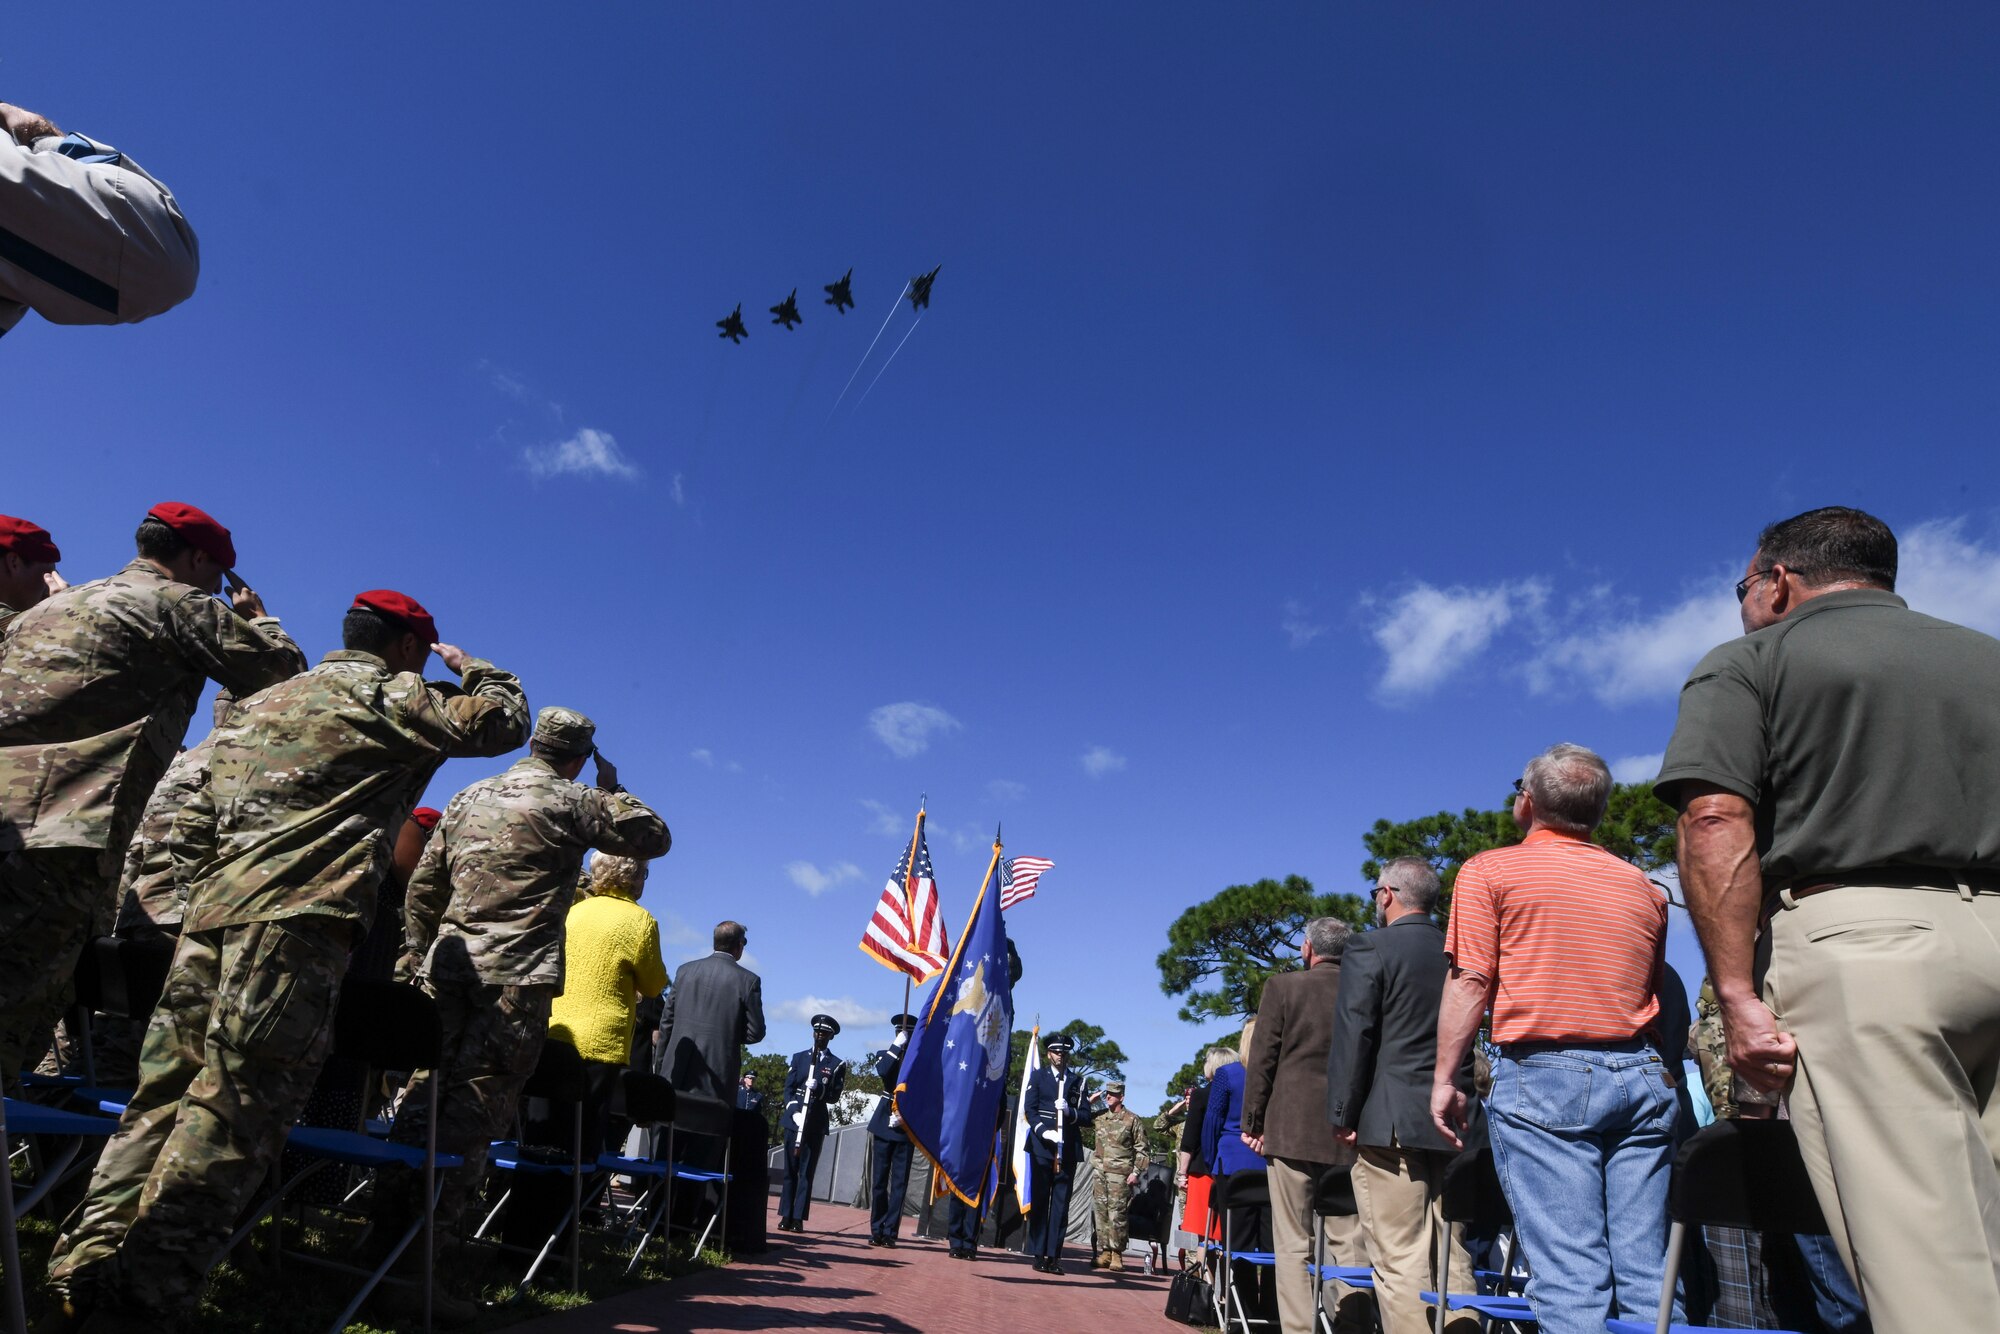 Four F-15E Strike Eagle aircraft with the 4th Fighter Wing flyover the U.S. Air Force Master Sgt. John A. Chapman Medal of Honor memorial unveiling ceremony on Oct. 27, 2018, at Hurlburt Field, Florida.